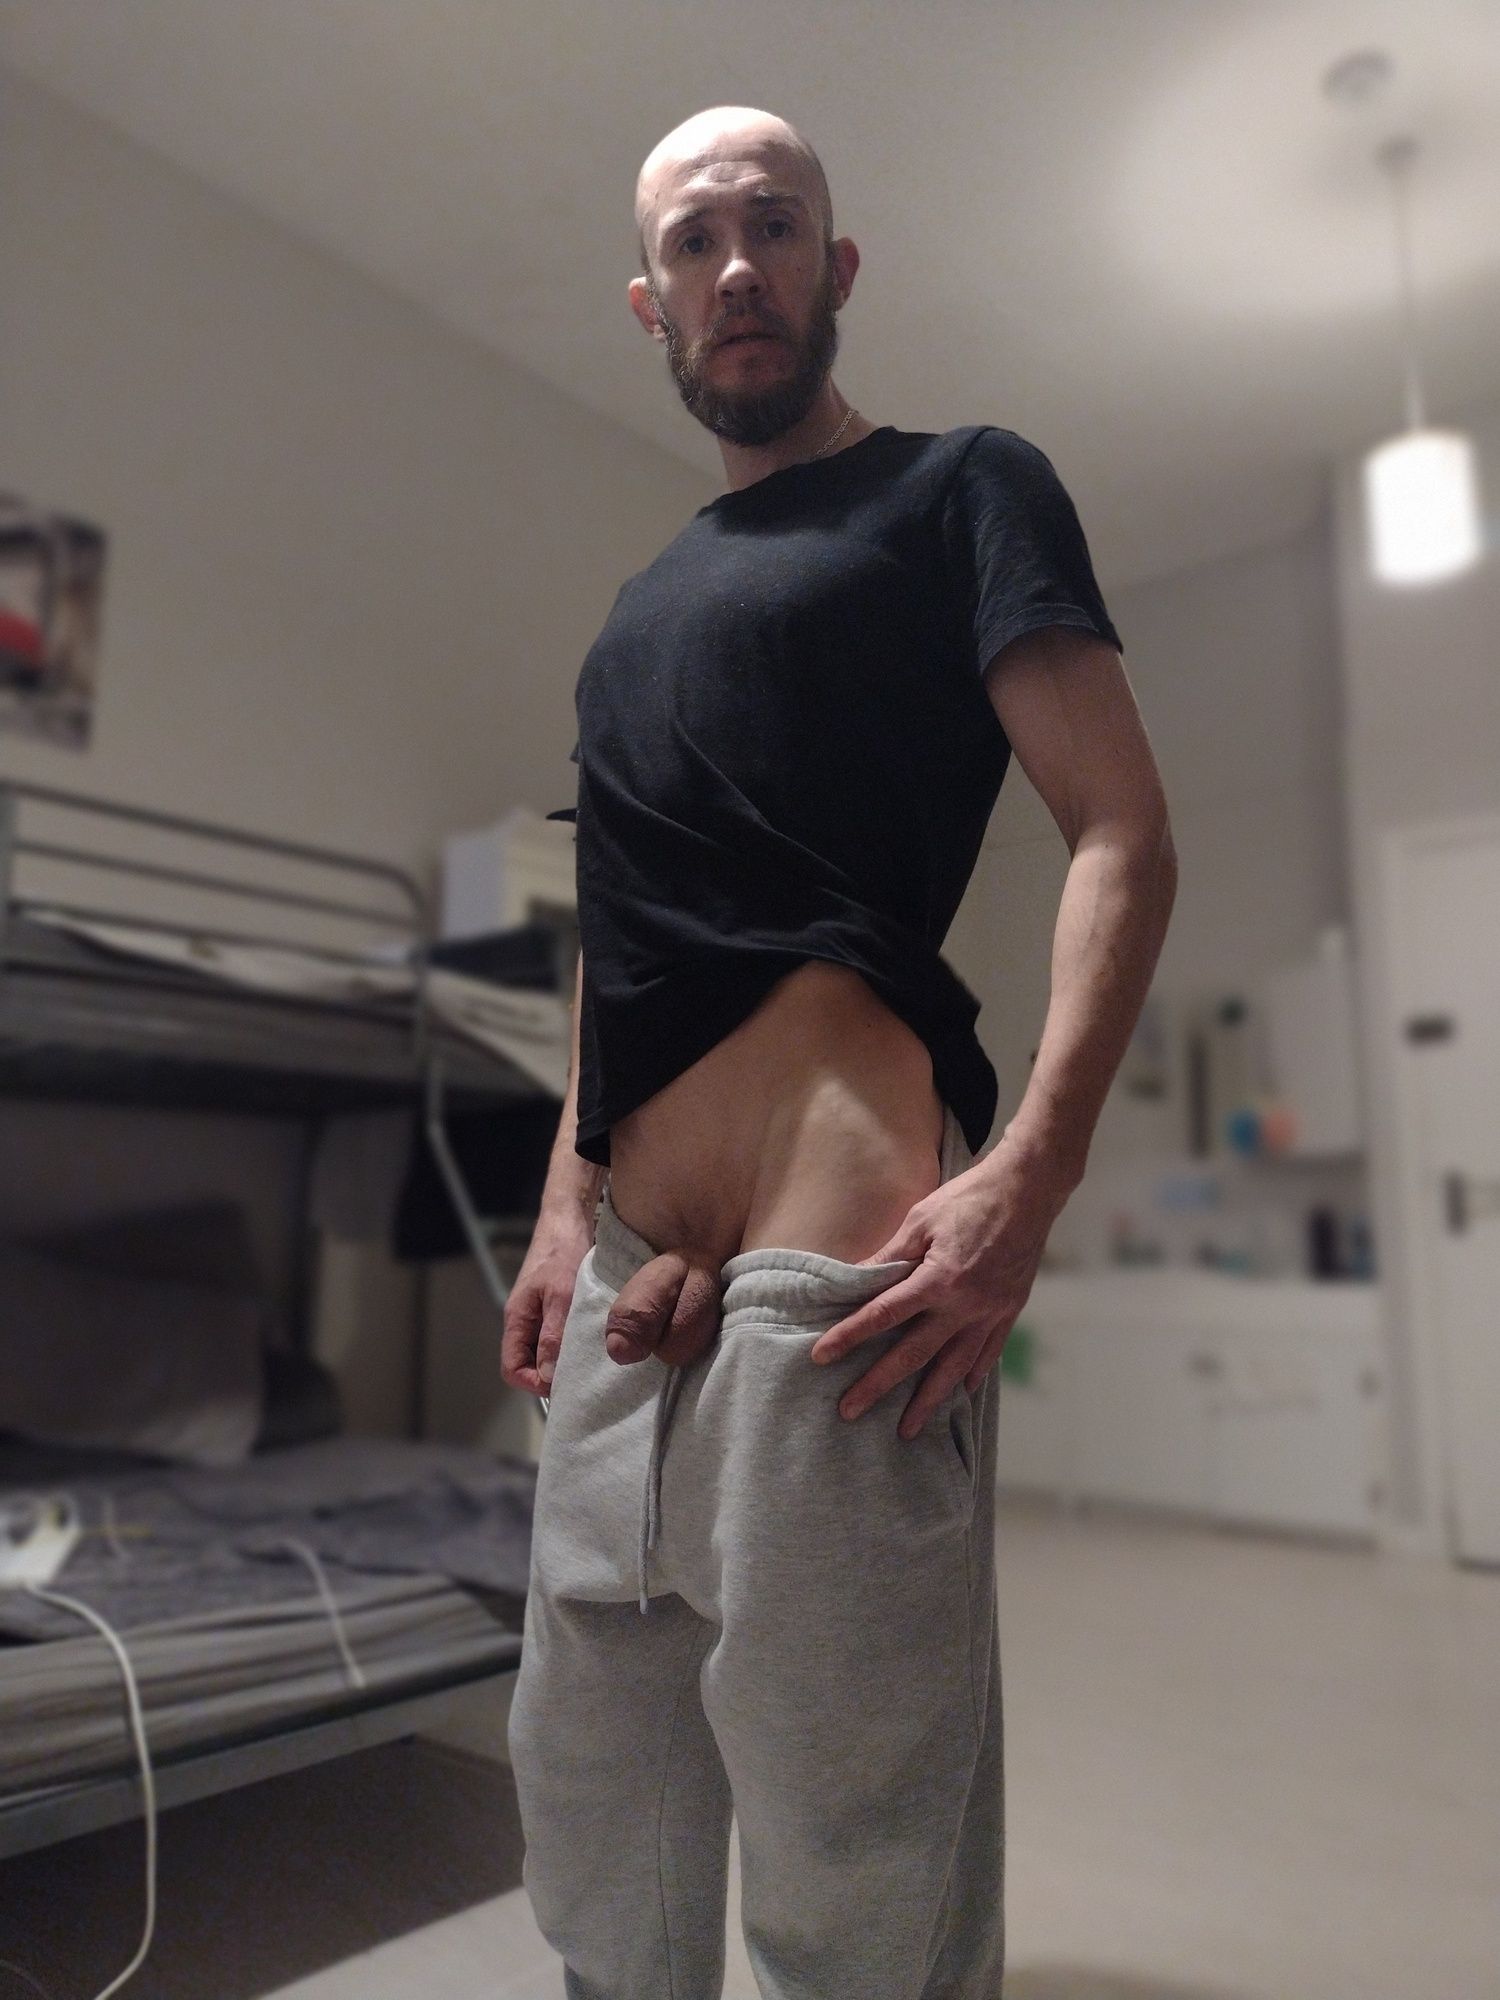 Showing soft dick #4